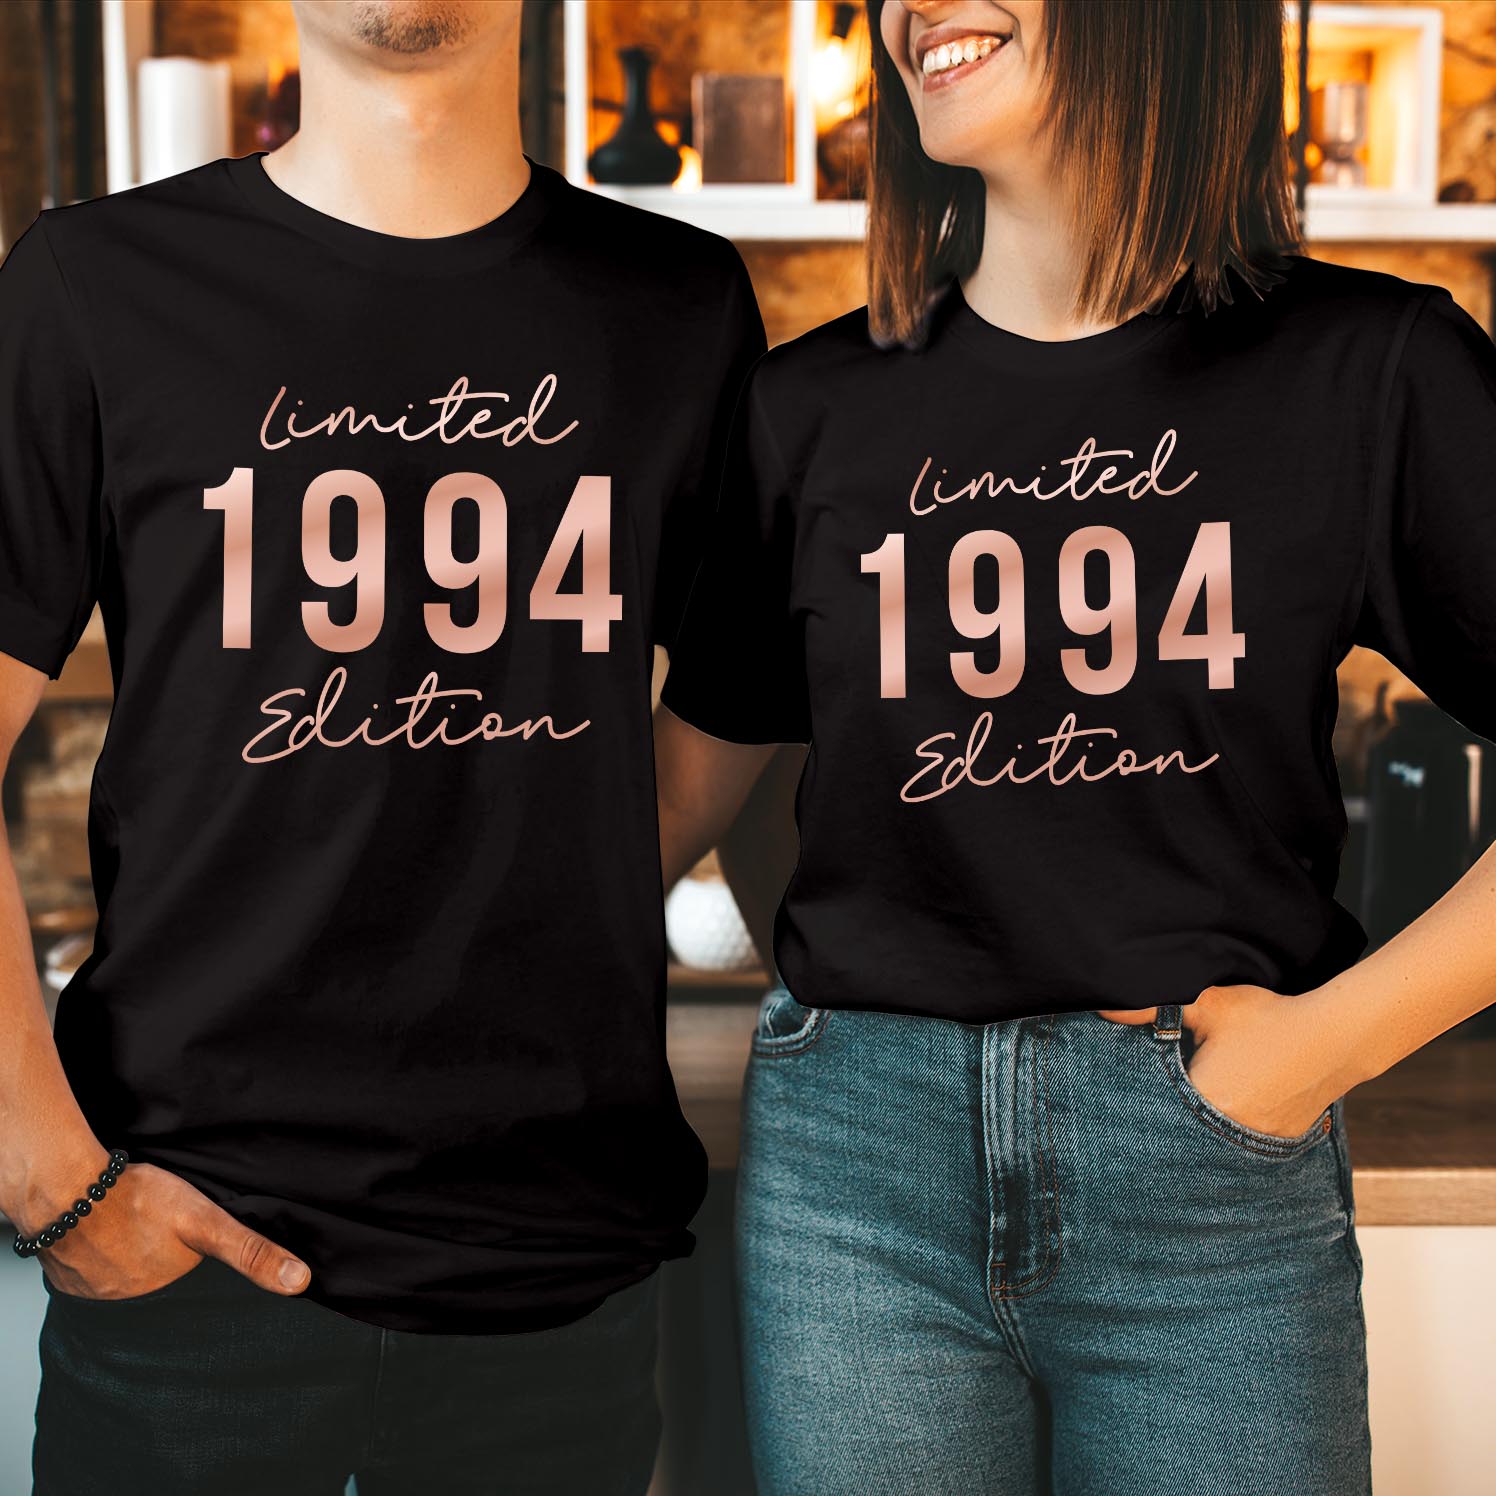 Vintage 1994 Limited Edition Retro 30th Birthday T-Shirt 30 Years Old Tops Men Women's Birthday Father's Day Anniversary Rose Gold Print Unisex T Shirt